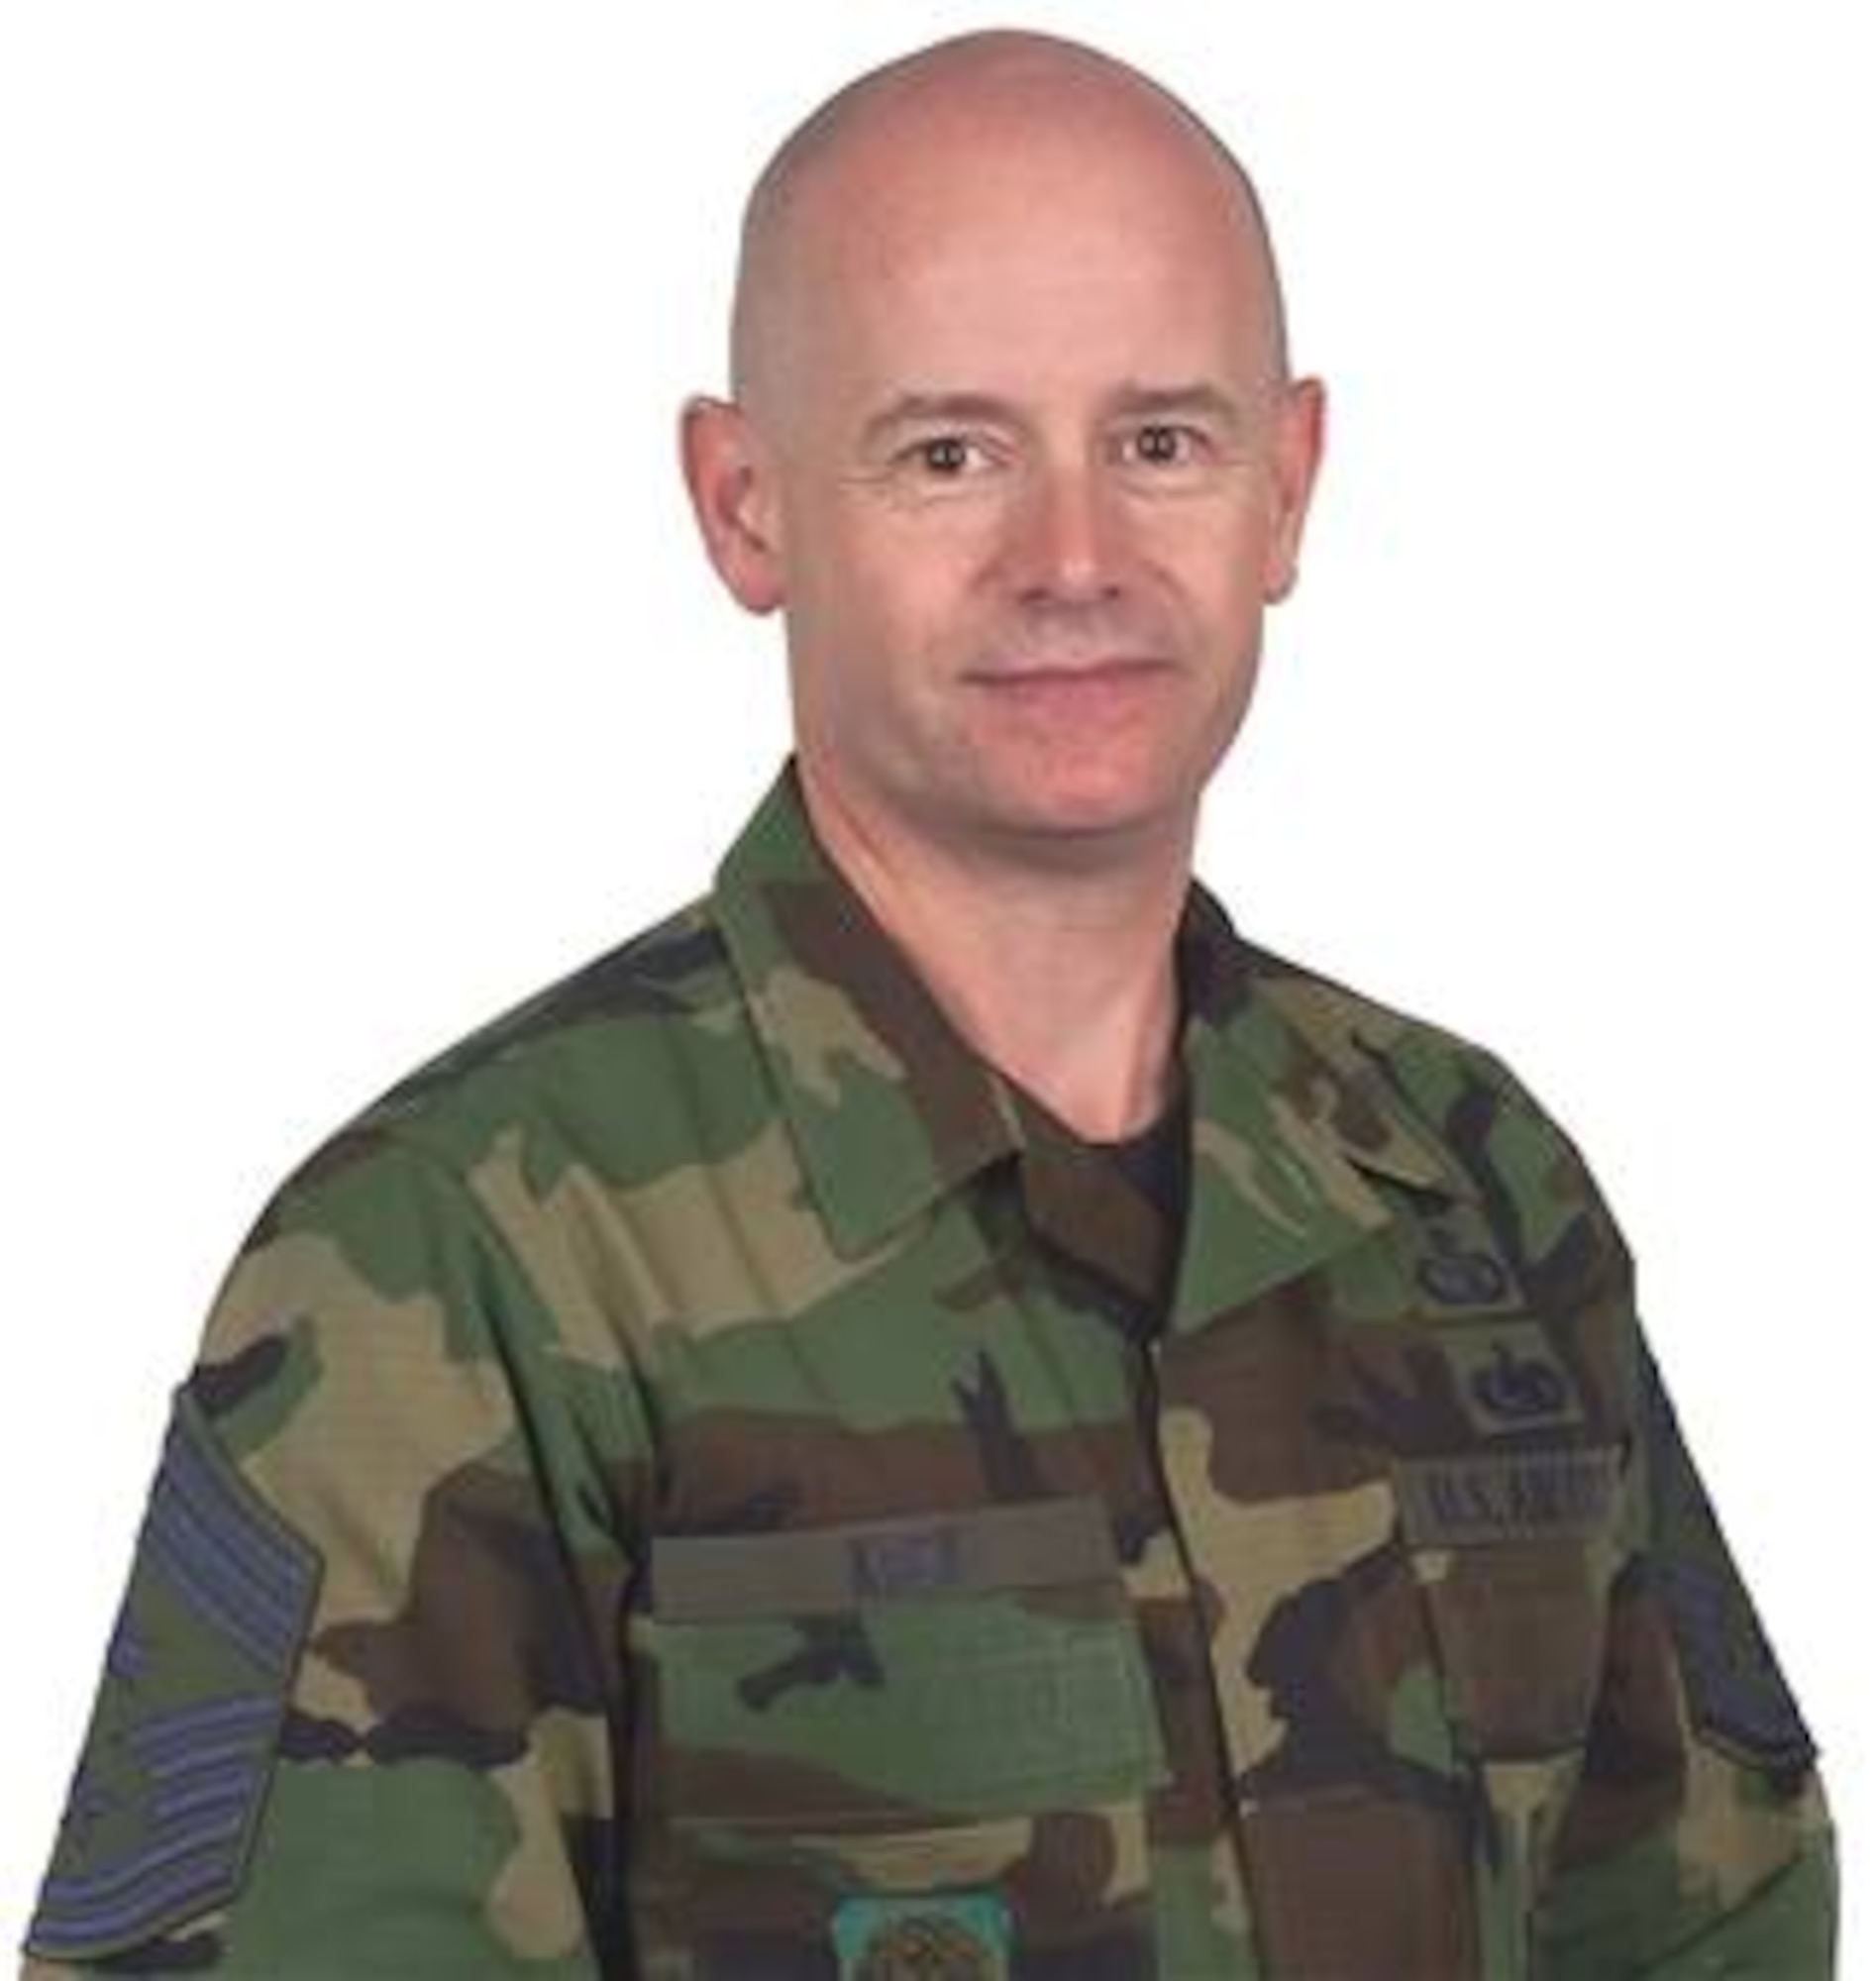 Chief Master Sgt. Russell Kuck, 62nd Airlift Wing chief master sergeant